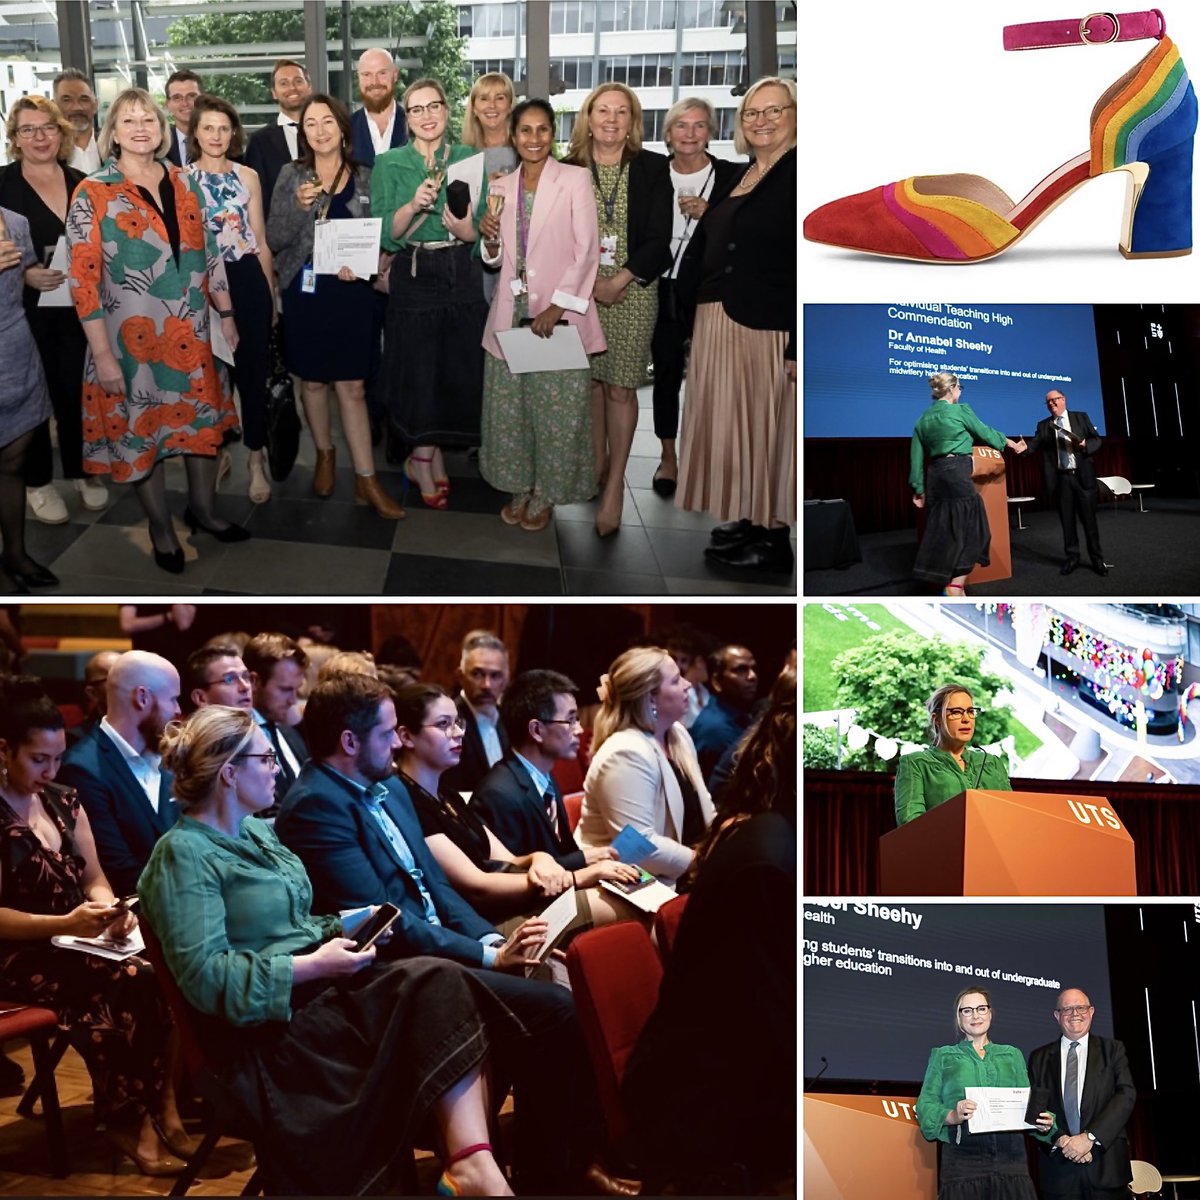 I want to say a special thank you to @LorettaMusgrave for being my “plus one” at the UTS Vice-Chancellor’s Learning and Teaching Awards Ceremony and my #DJANGOANDJULIETTE shoes which happily escorted my feet. I can say they were quite snazzy and comfortable. @utsSoNM @UTS_Health